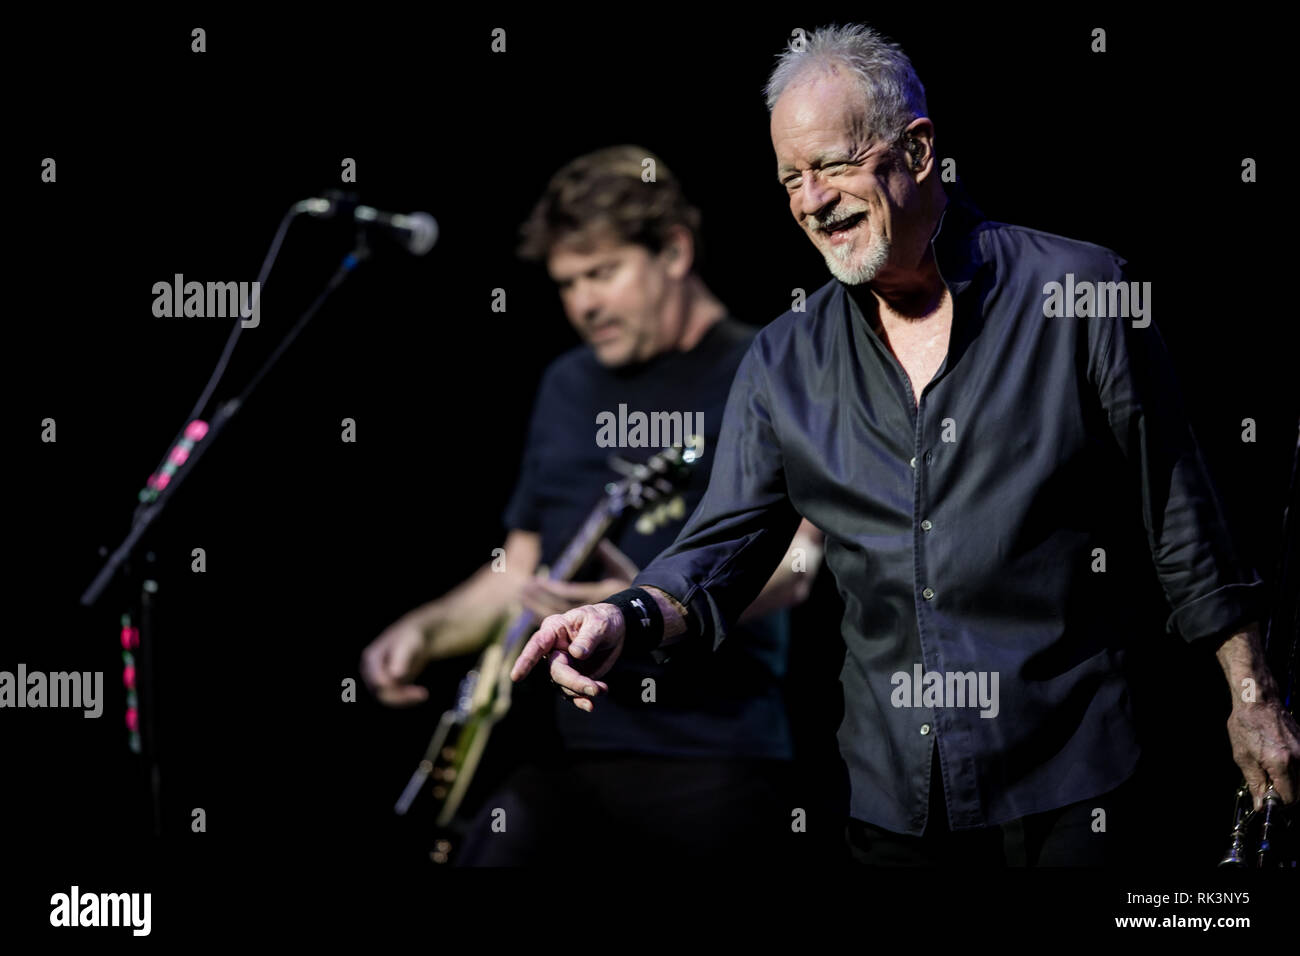 Las Vegas, NV, USA. 8th Feb, 2019. ***HOUSE COVERAGE*** James Pankow pictured as CHICAGO performs at The Venetian Theater at Venetian Las Vegas in Las vegas, NV on February 8, 2019. Credit: Erik Kabik Photography/Media Punch/Alamy Live News Stock Photo